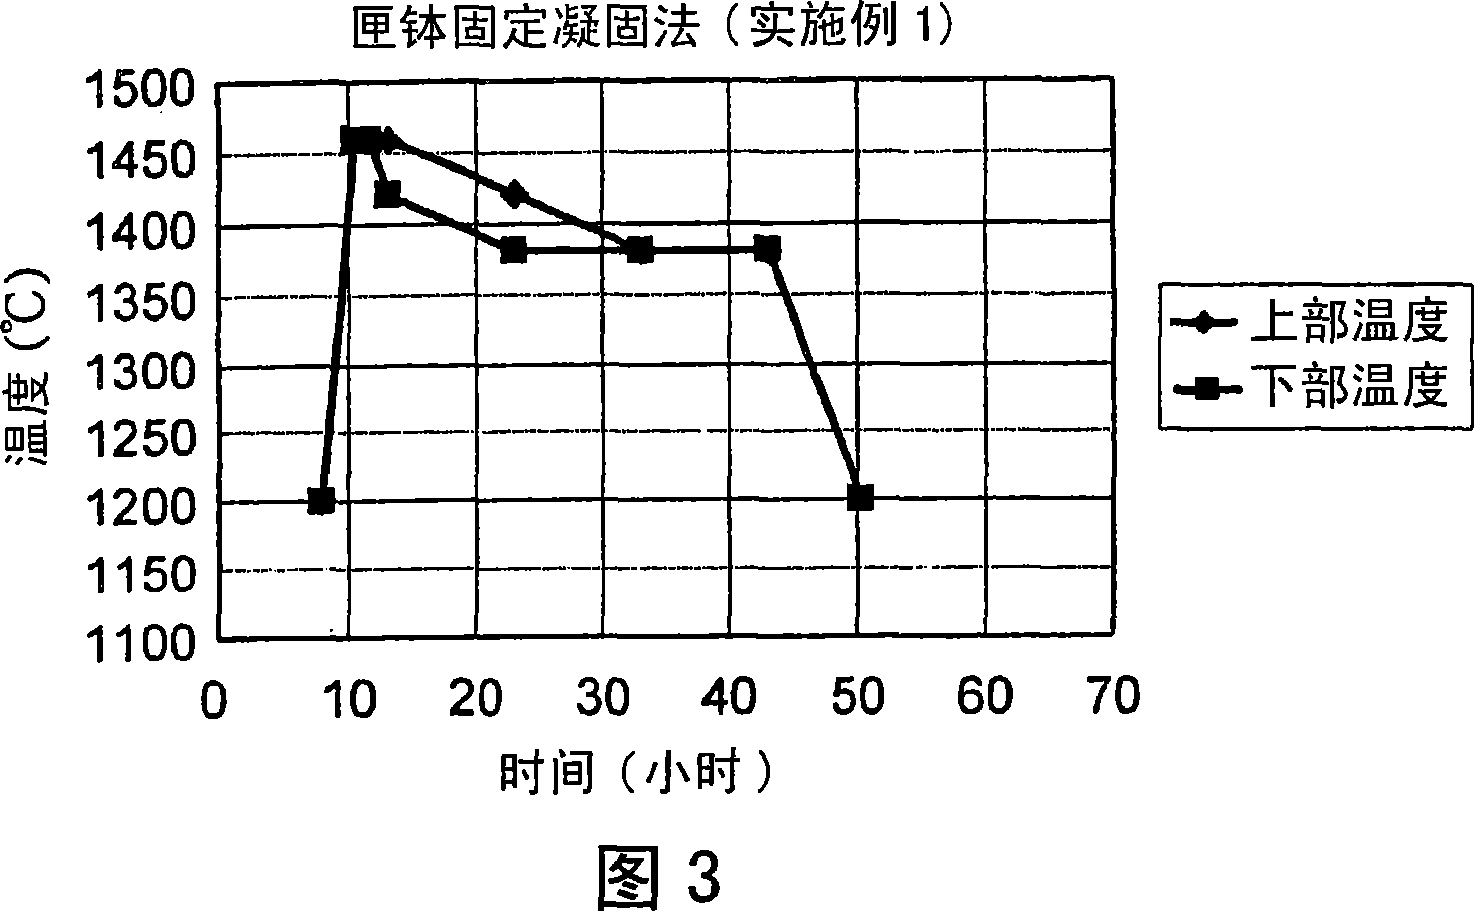 Process for producing polycrystalline silicon bar